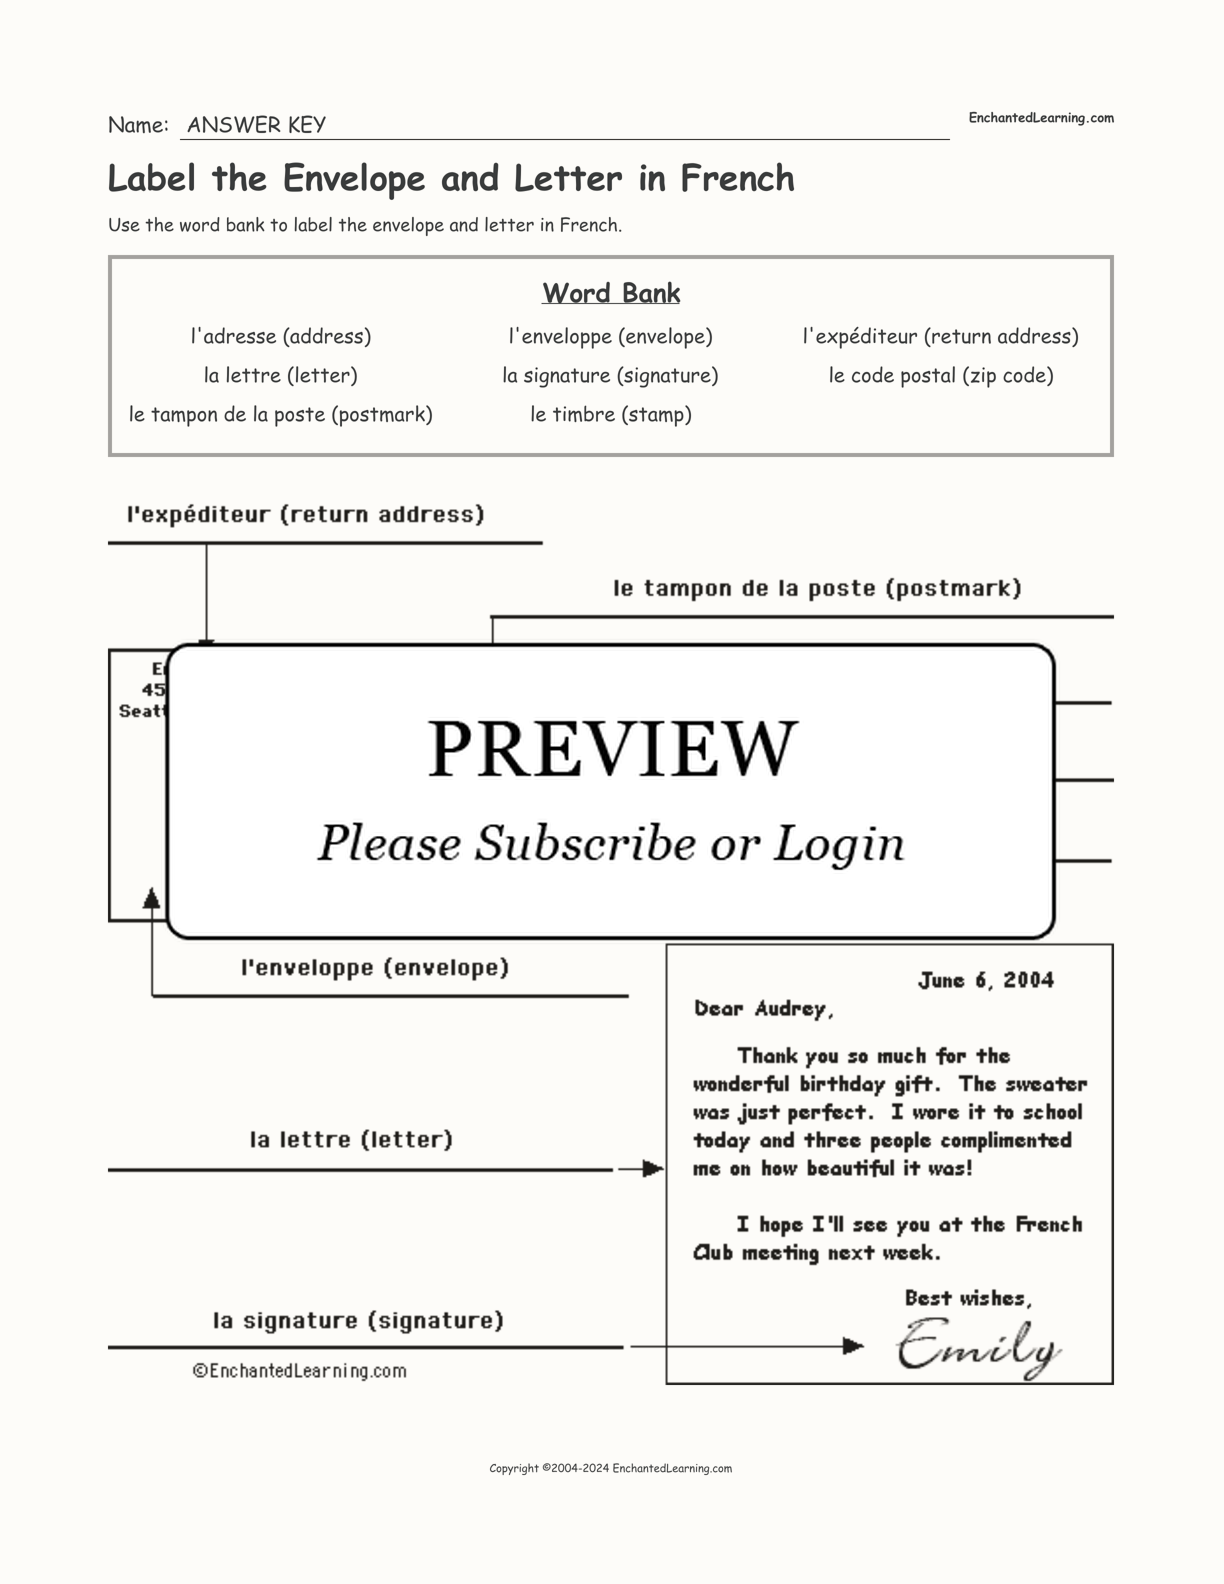 Label the Envelope and Letter in French interactive worksheet page 2